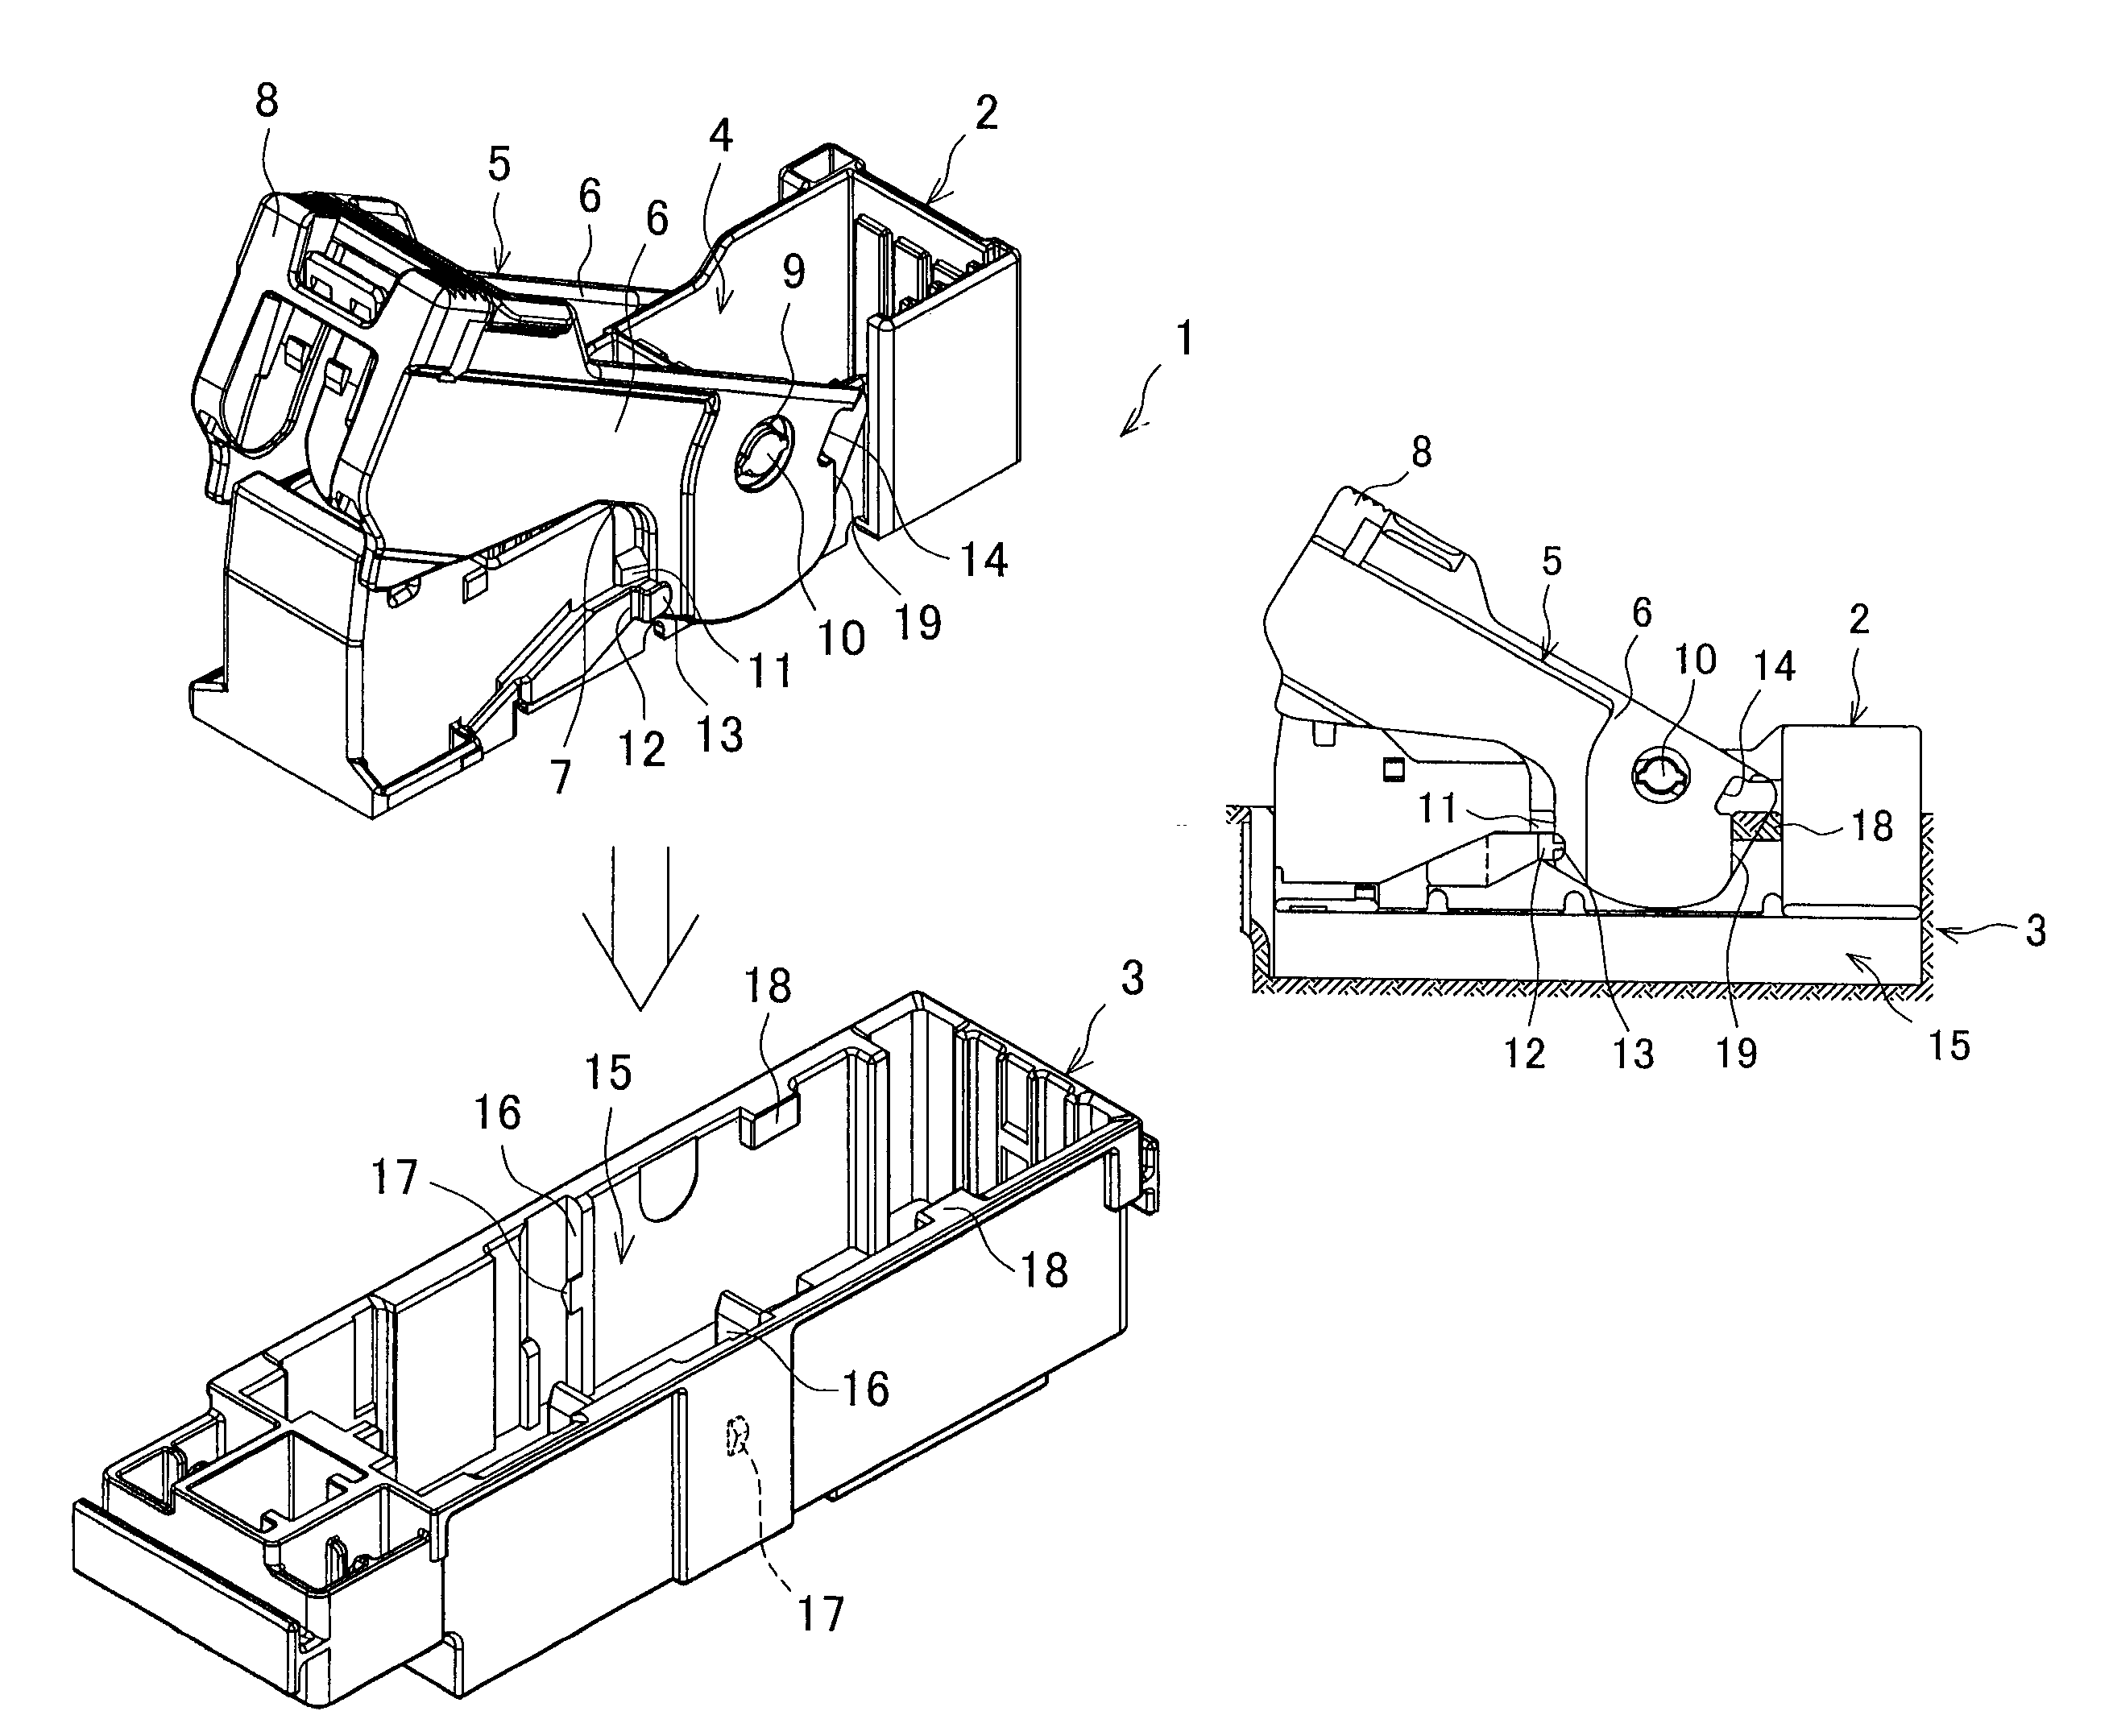 Lever type connector including rotation restricting portion